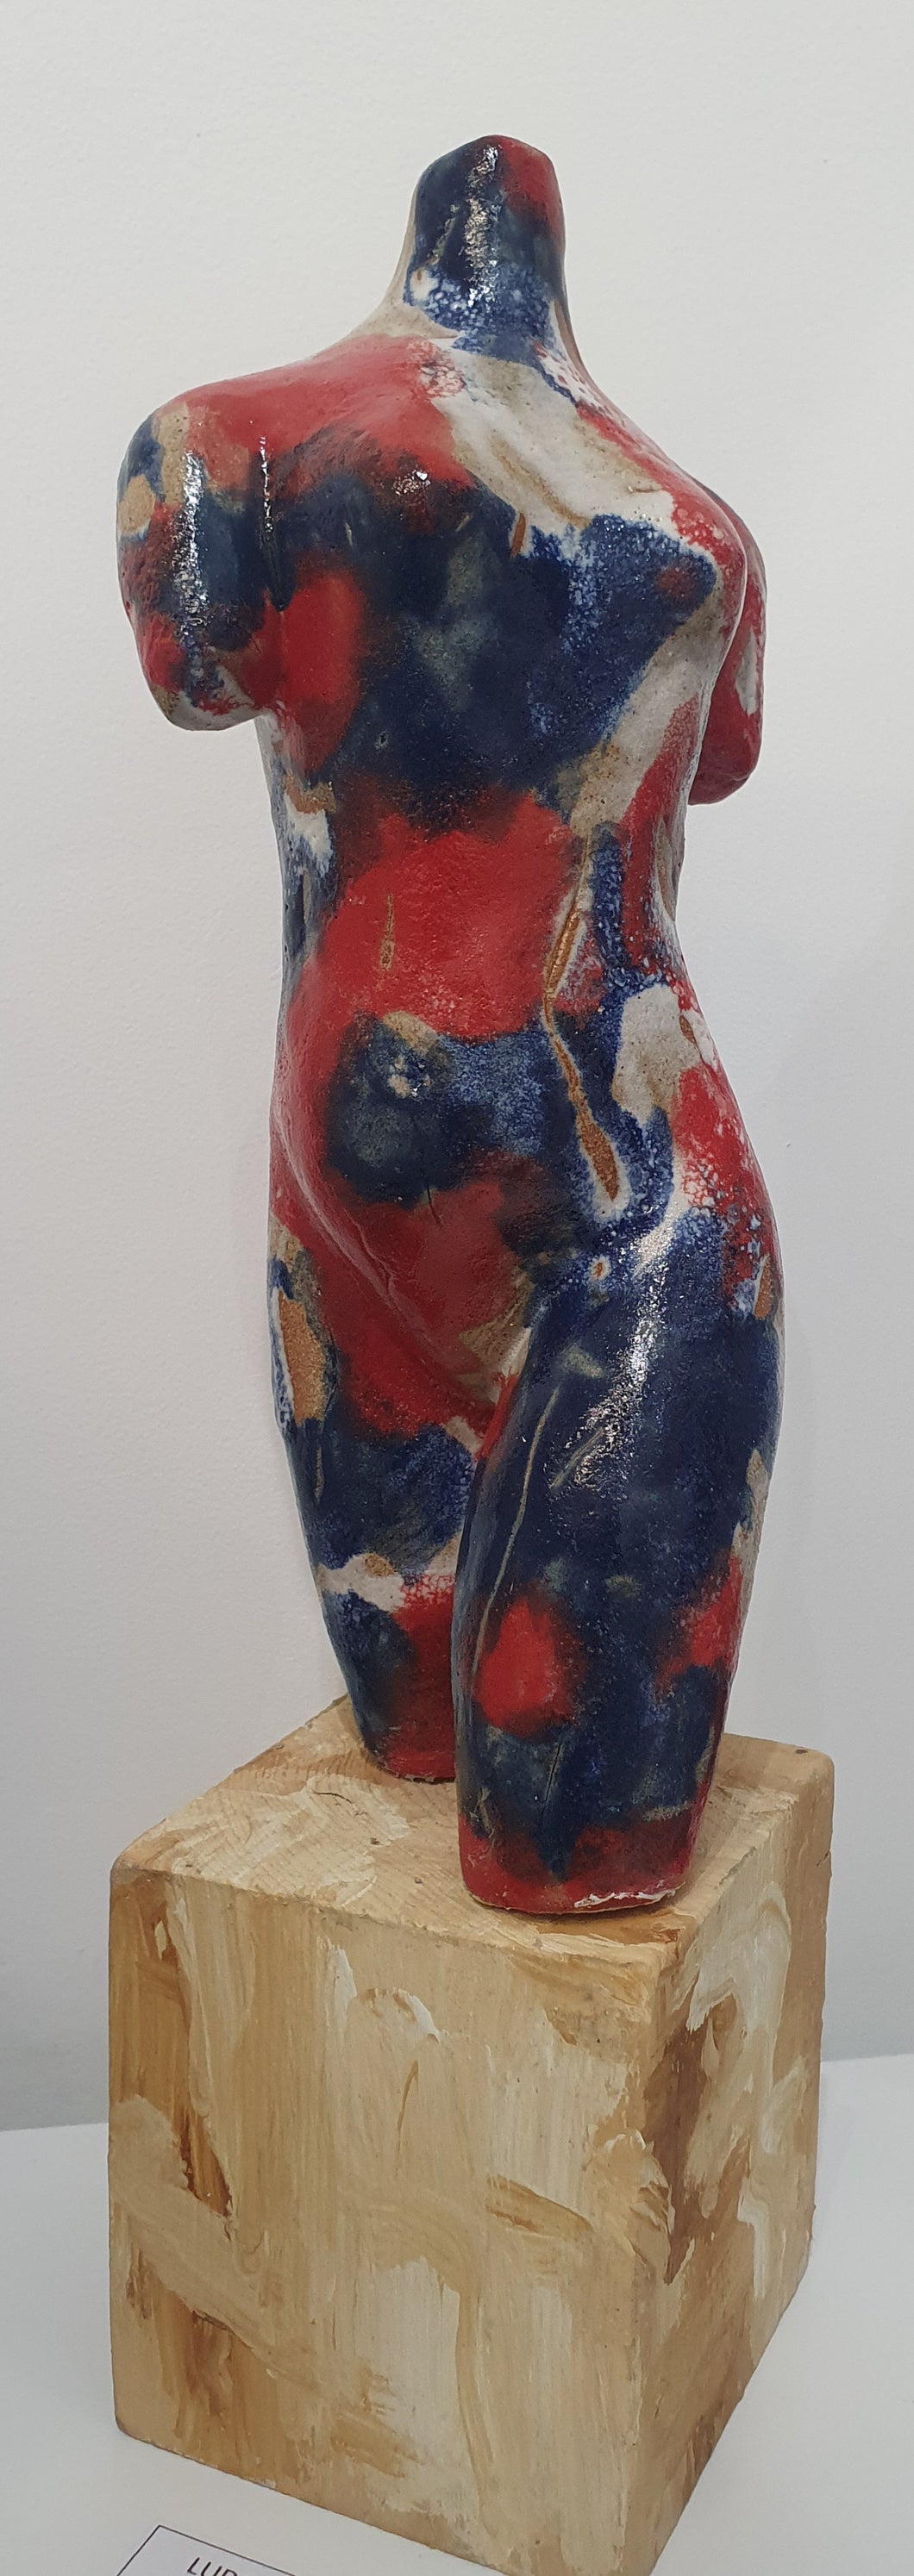 Figurative Sculpture About! by Sophie Howard